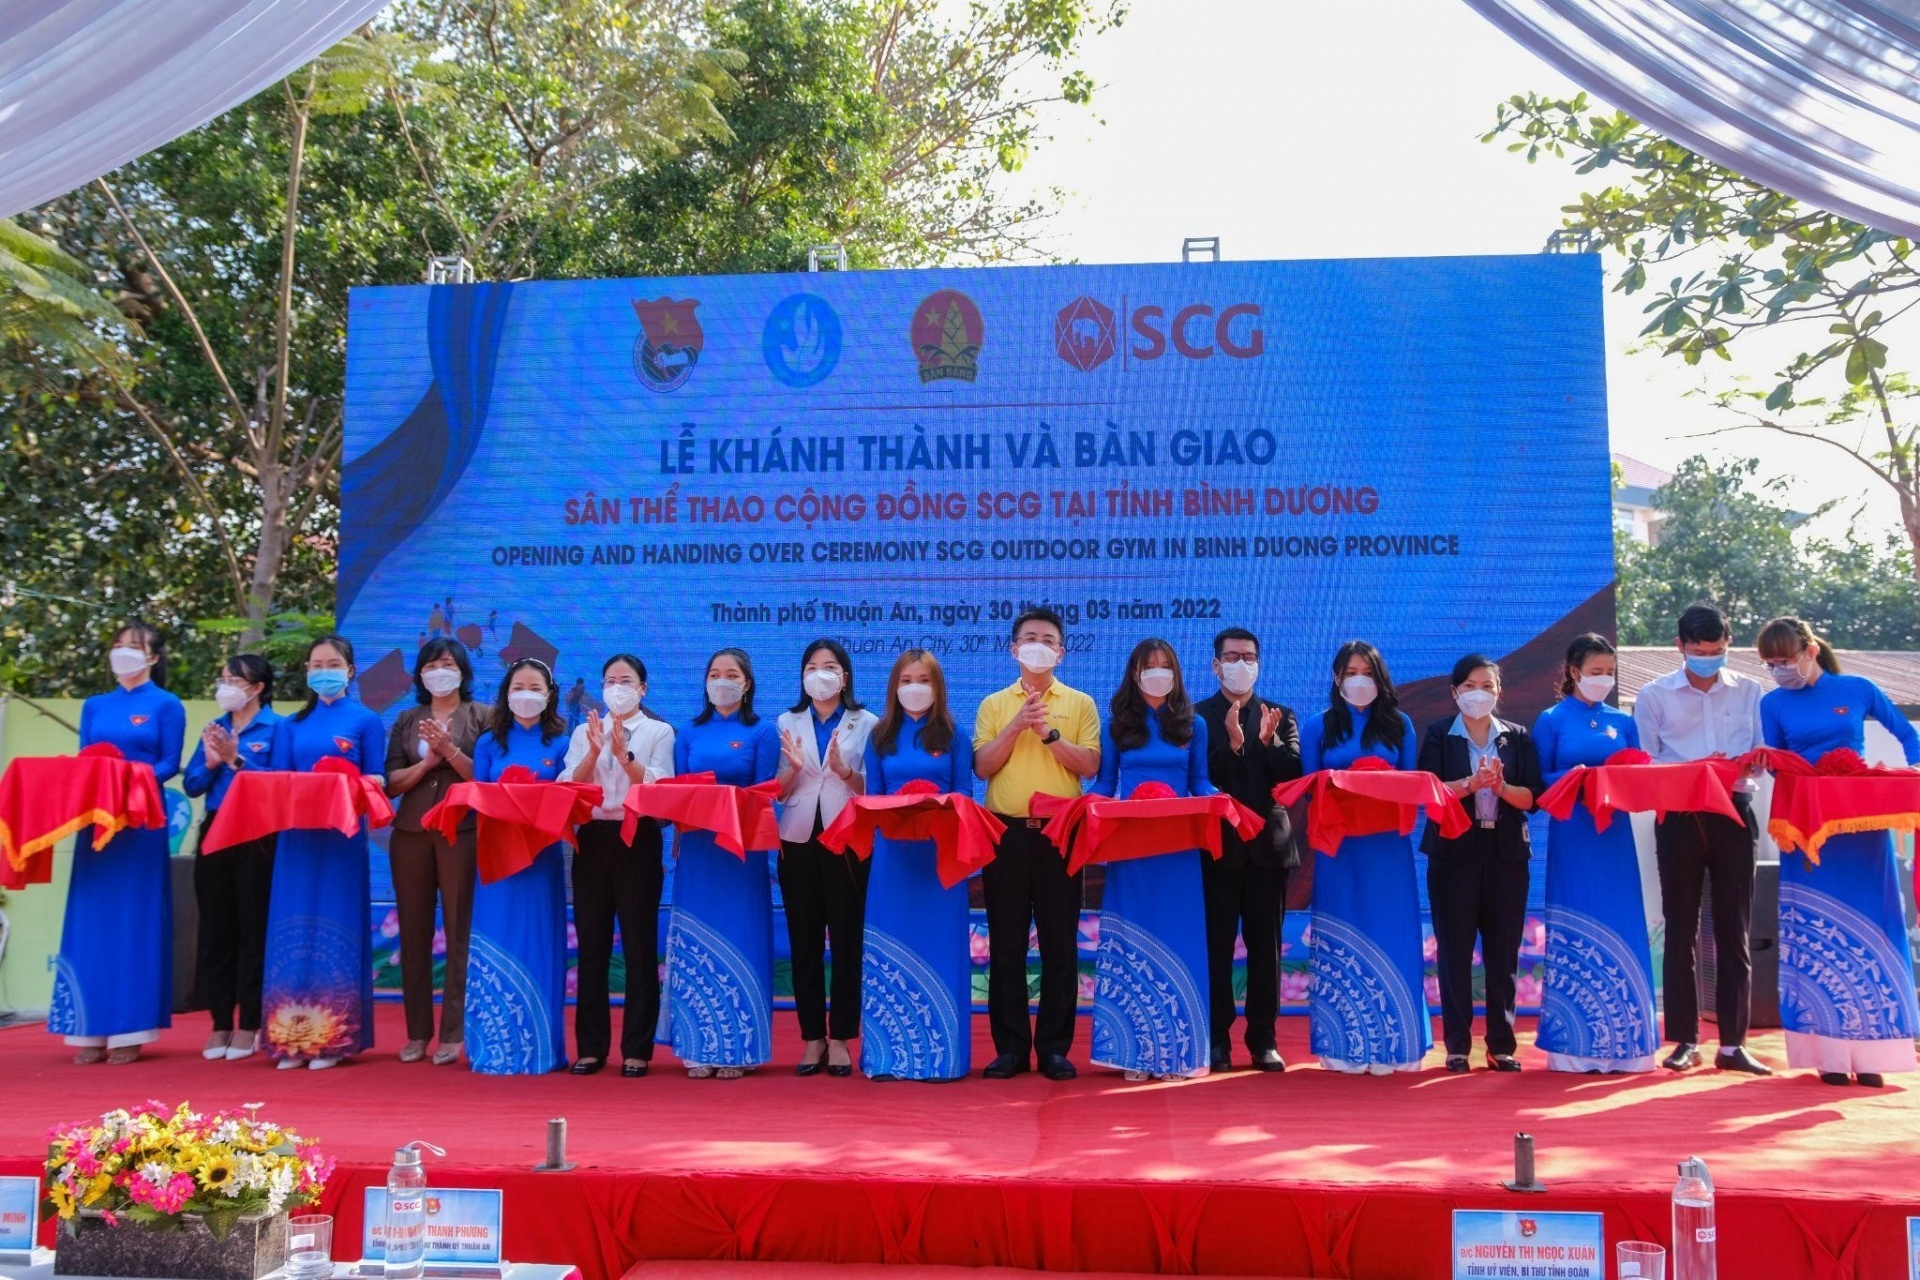 SCG supports Binh Duong in uplifting public health